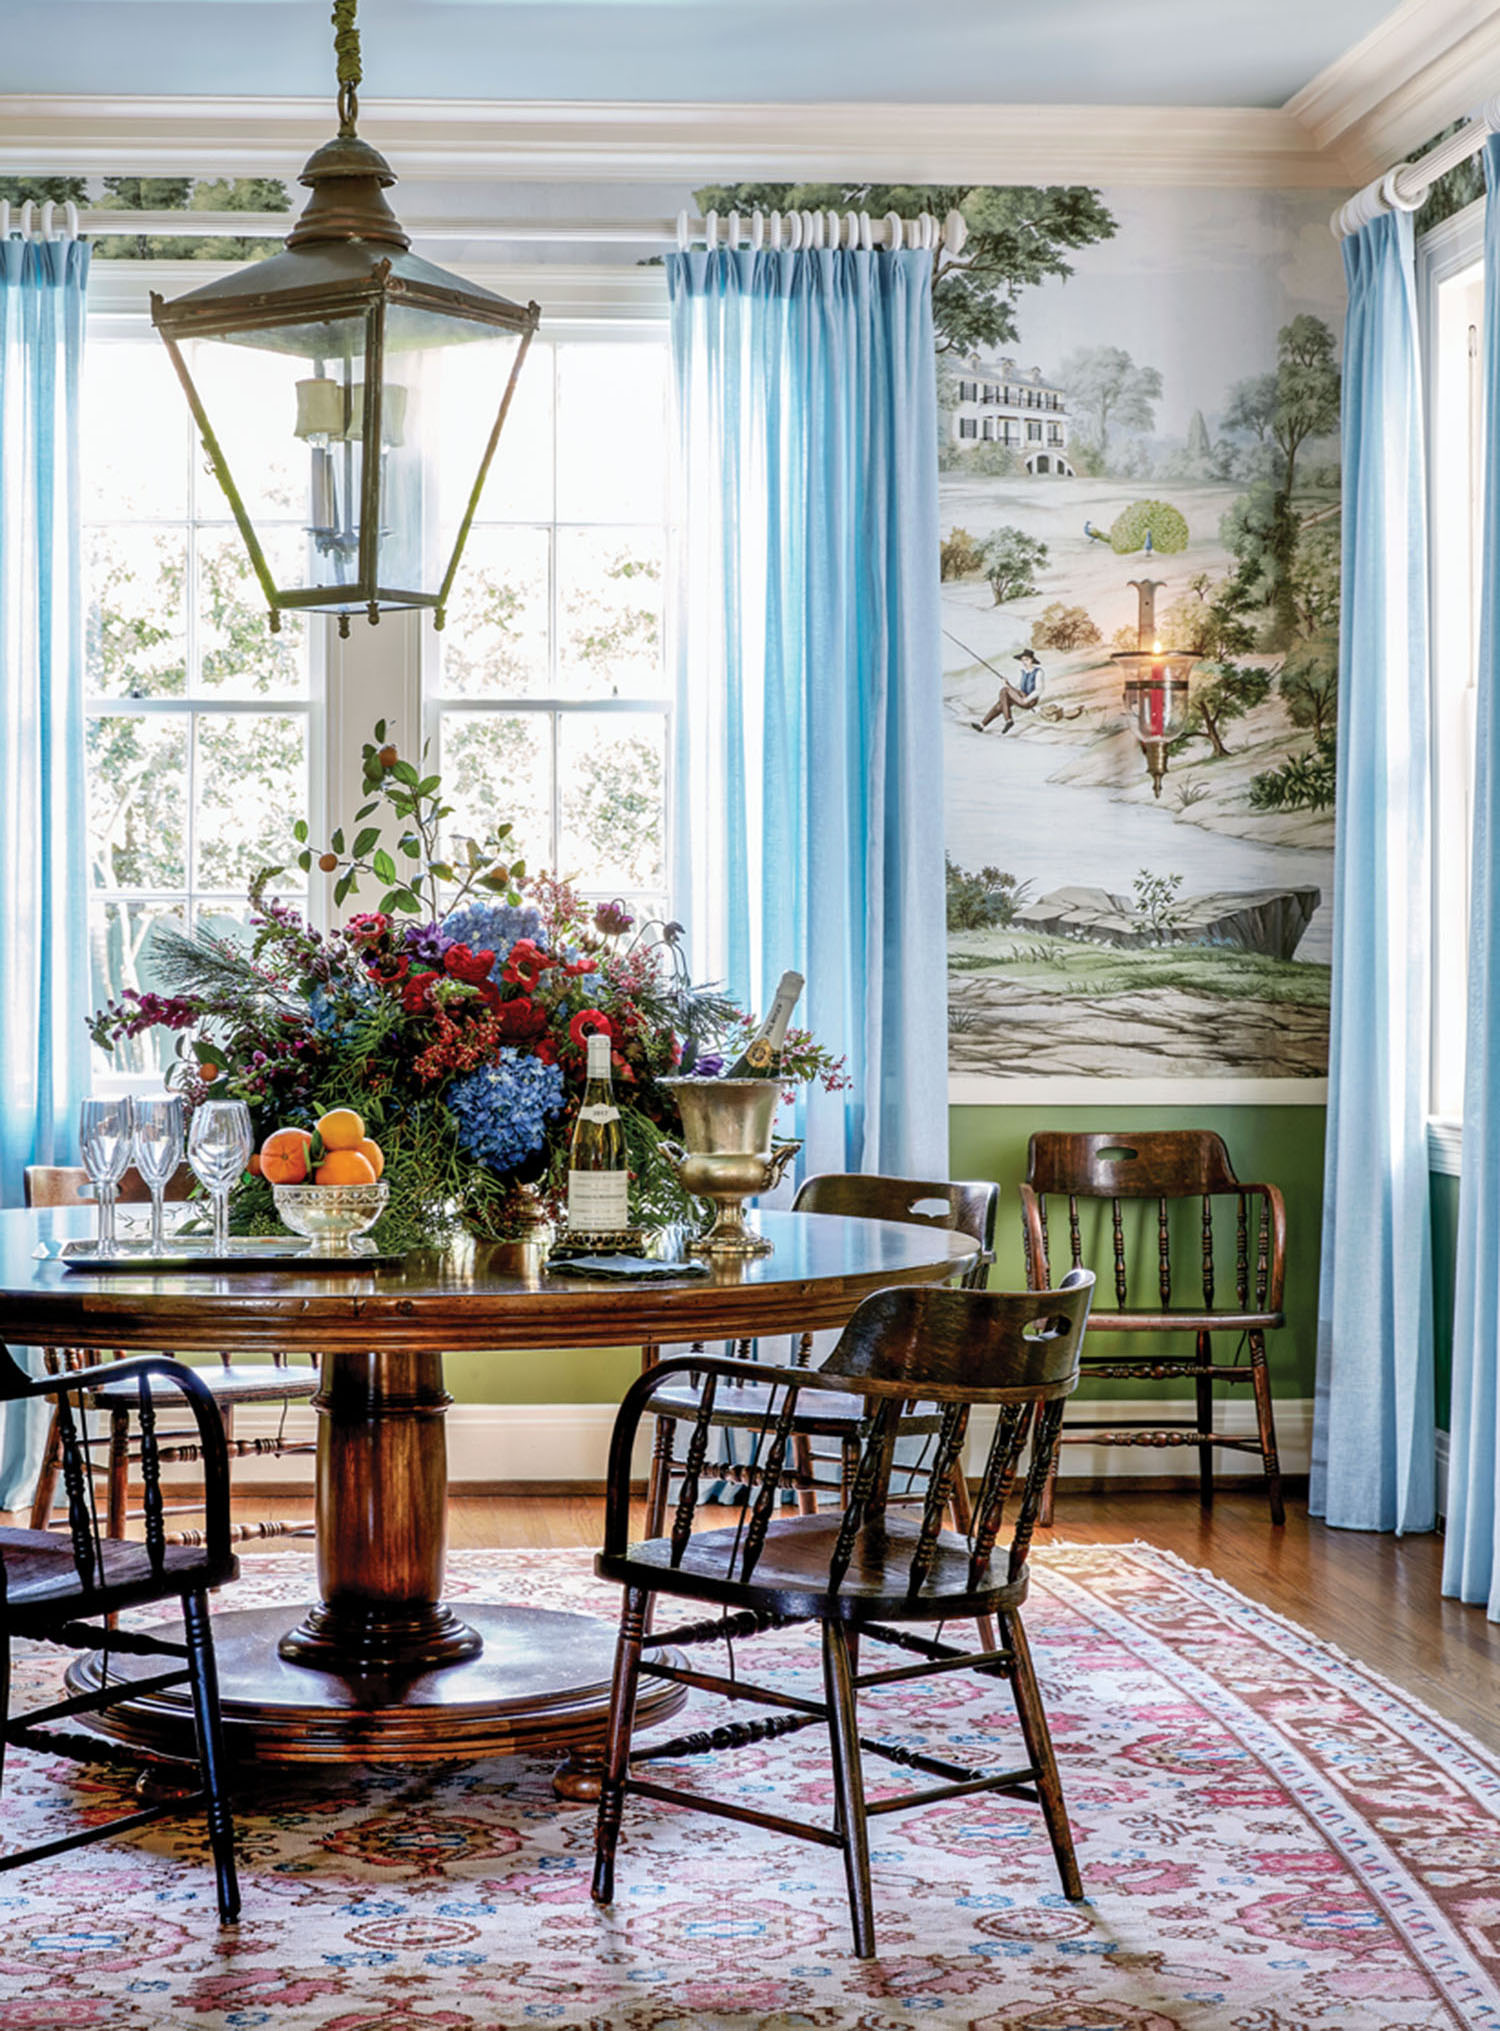 Dining room in the New Orleans home of Ware Porter. Features: Scenic wallpaper in a green colorway, pale blue sheer drapery panels, antique circular wood dining table and chairs, oriental rug, pale blue ceiling